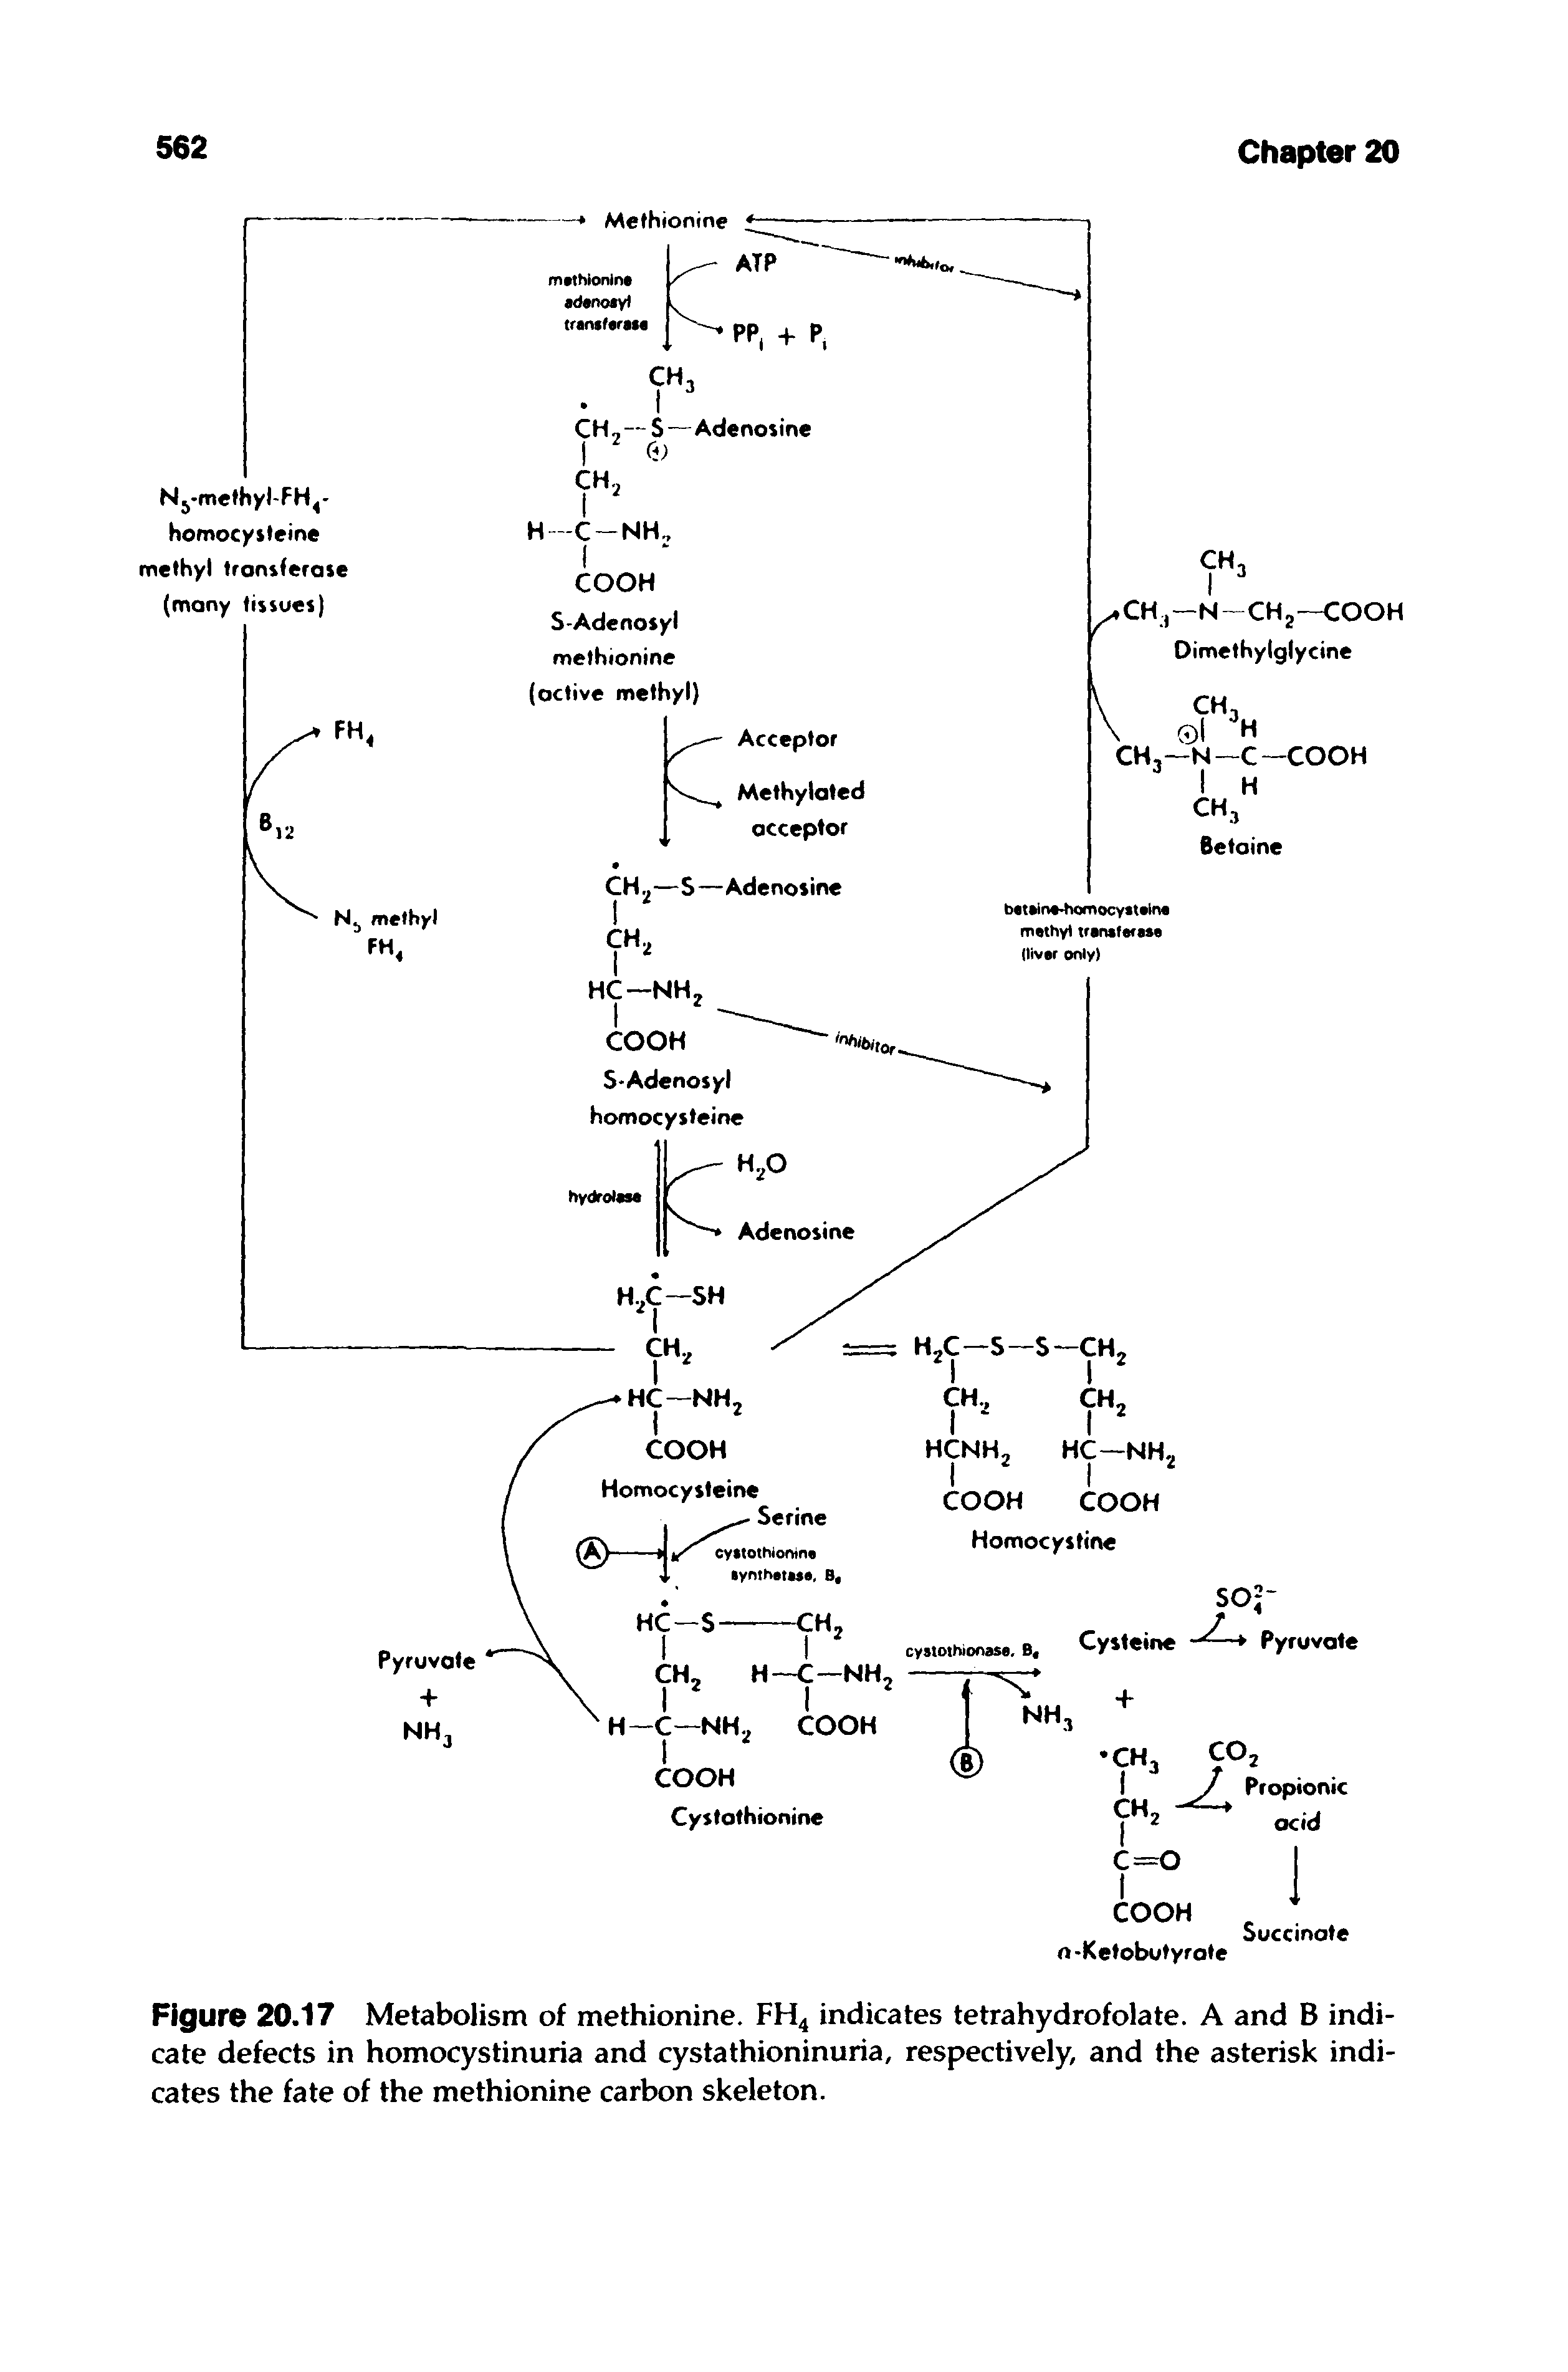 Figure 20.17 Metabolism of methionine. FH4 indicates tetrahydrofolate. A and B indicate defects in homocystinuria and cystathioninuria, respectively, and the asterisk indicates the fate of the methionine carbon skeleton.